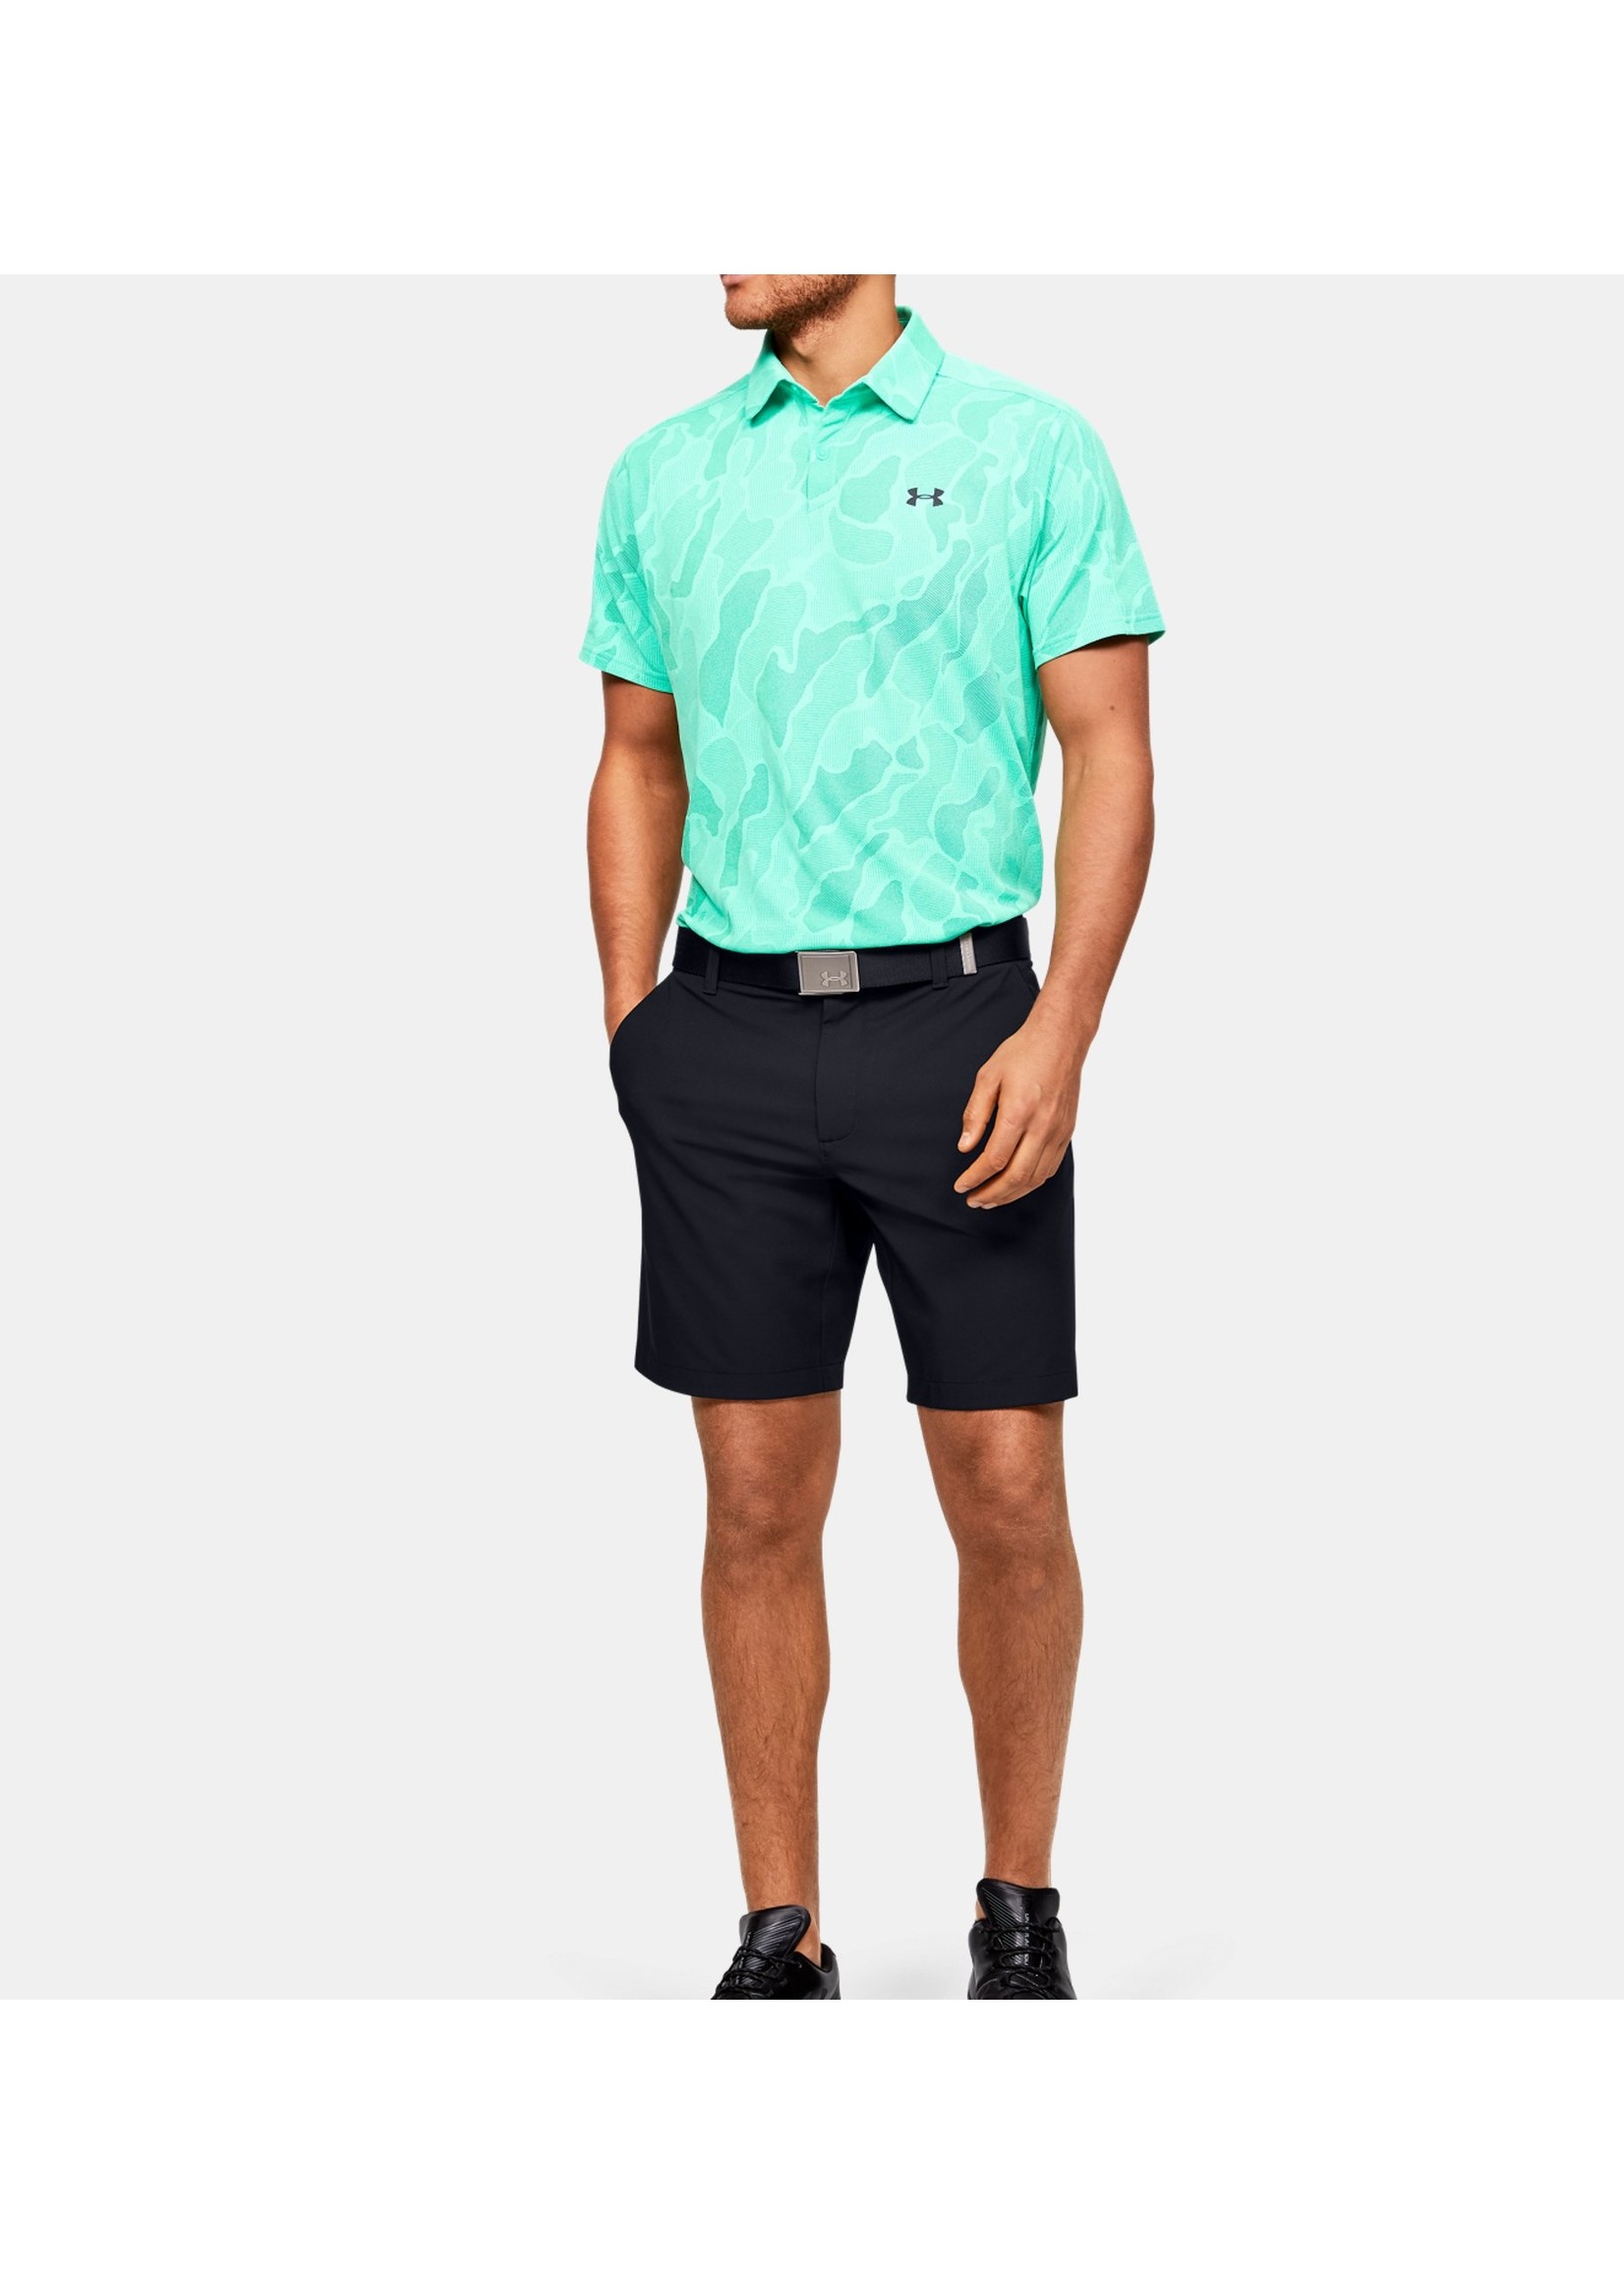 UNDER ARMOUR Men's UA Iso-Chill Shorts